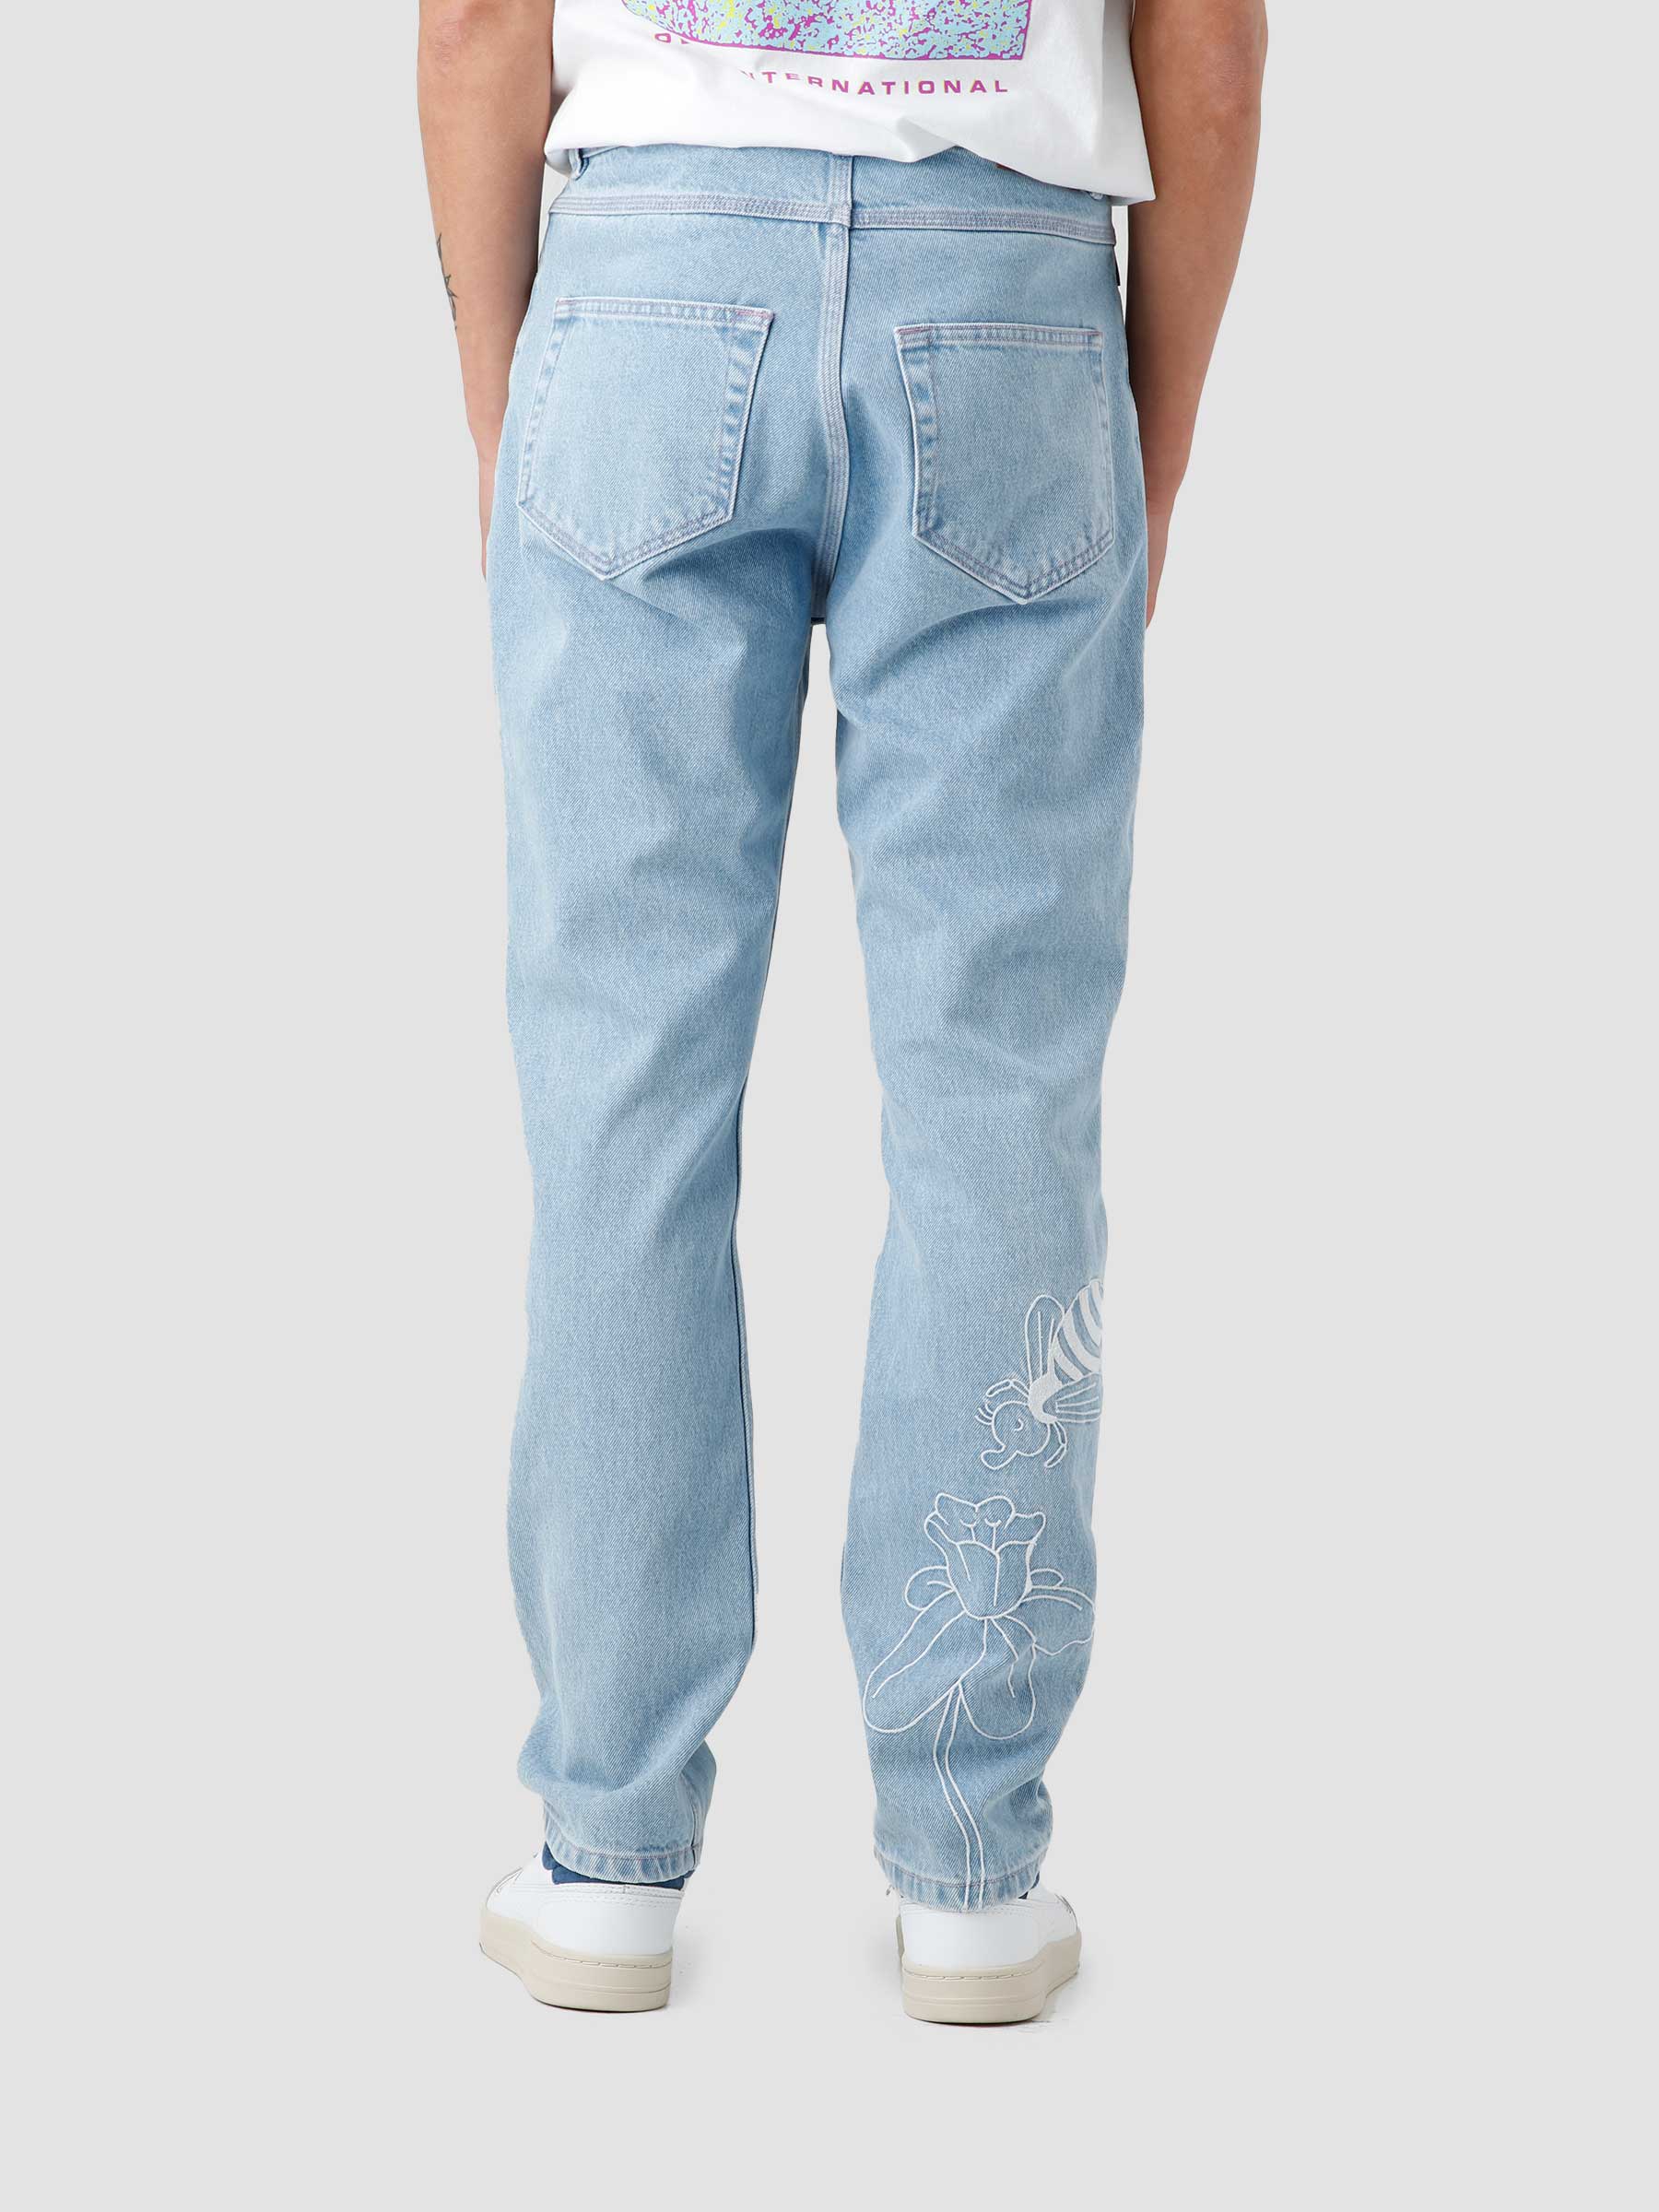 The New Originals Freddy Bee Jeans